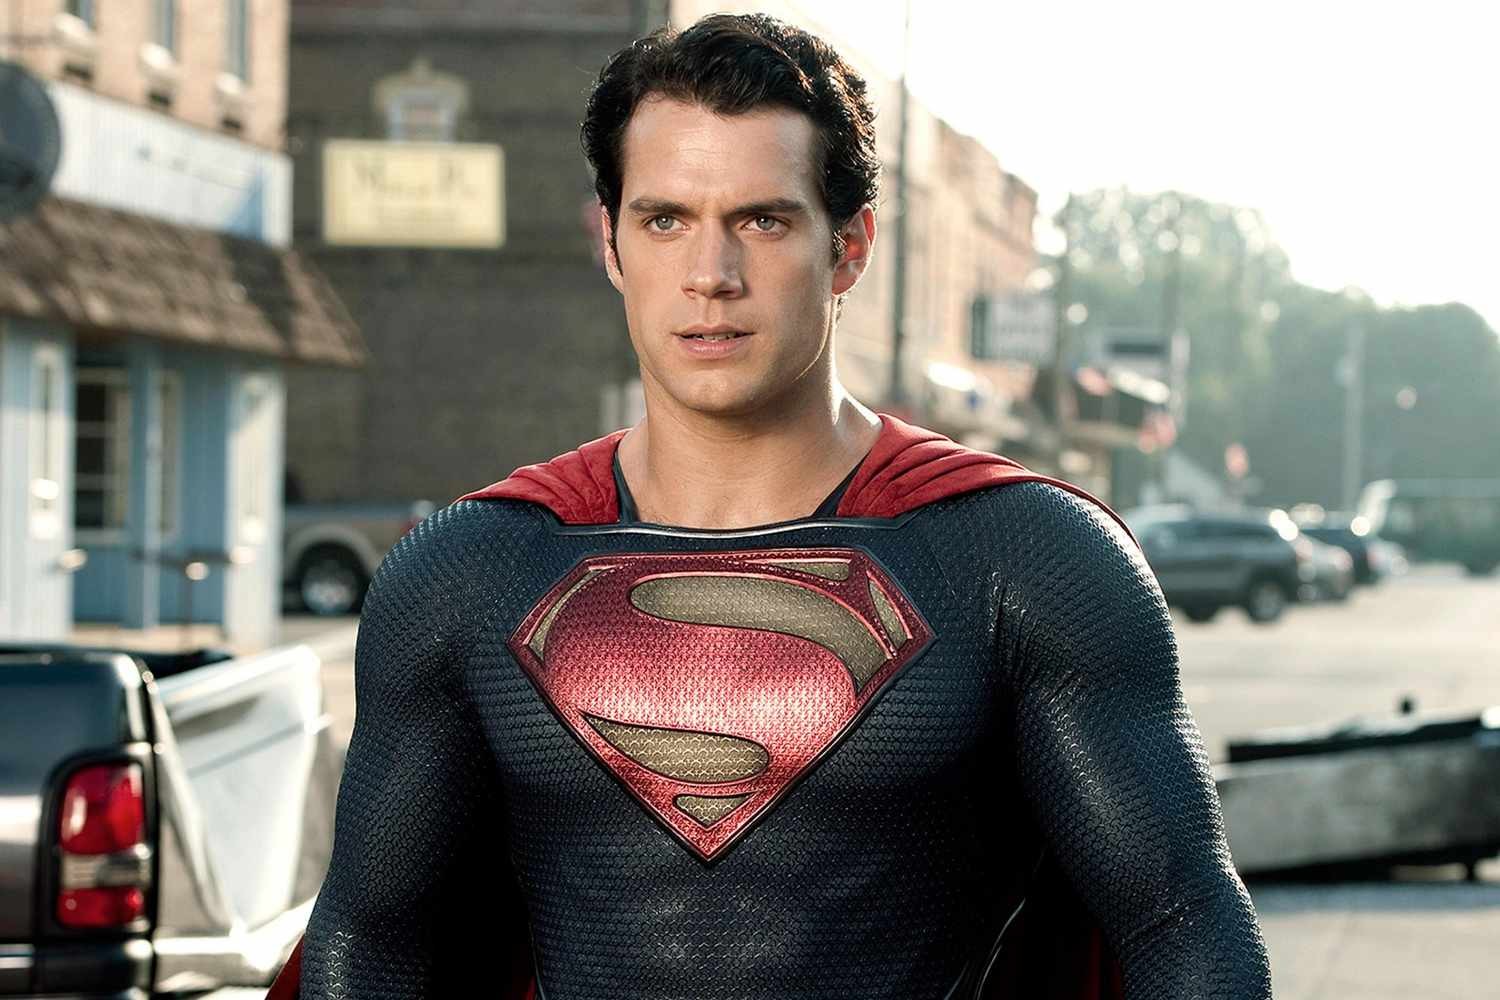 Henry Cavill is rumored to join the Marvel Cinematic Universe